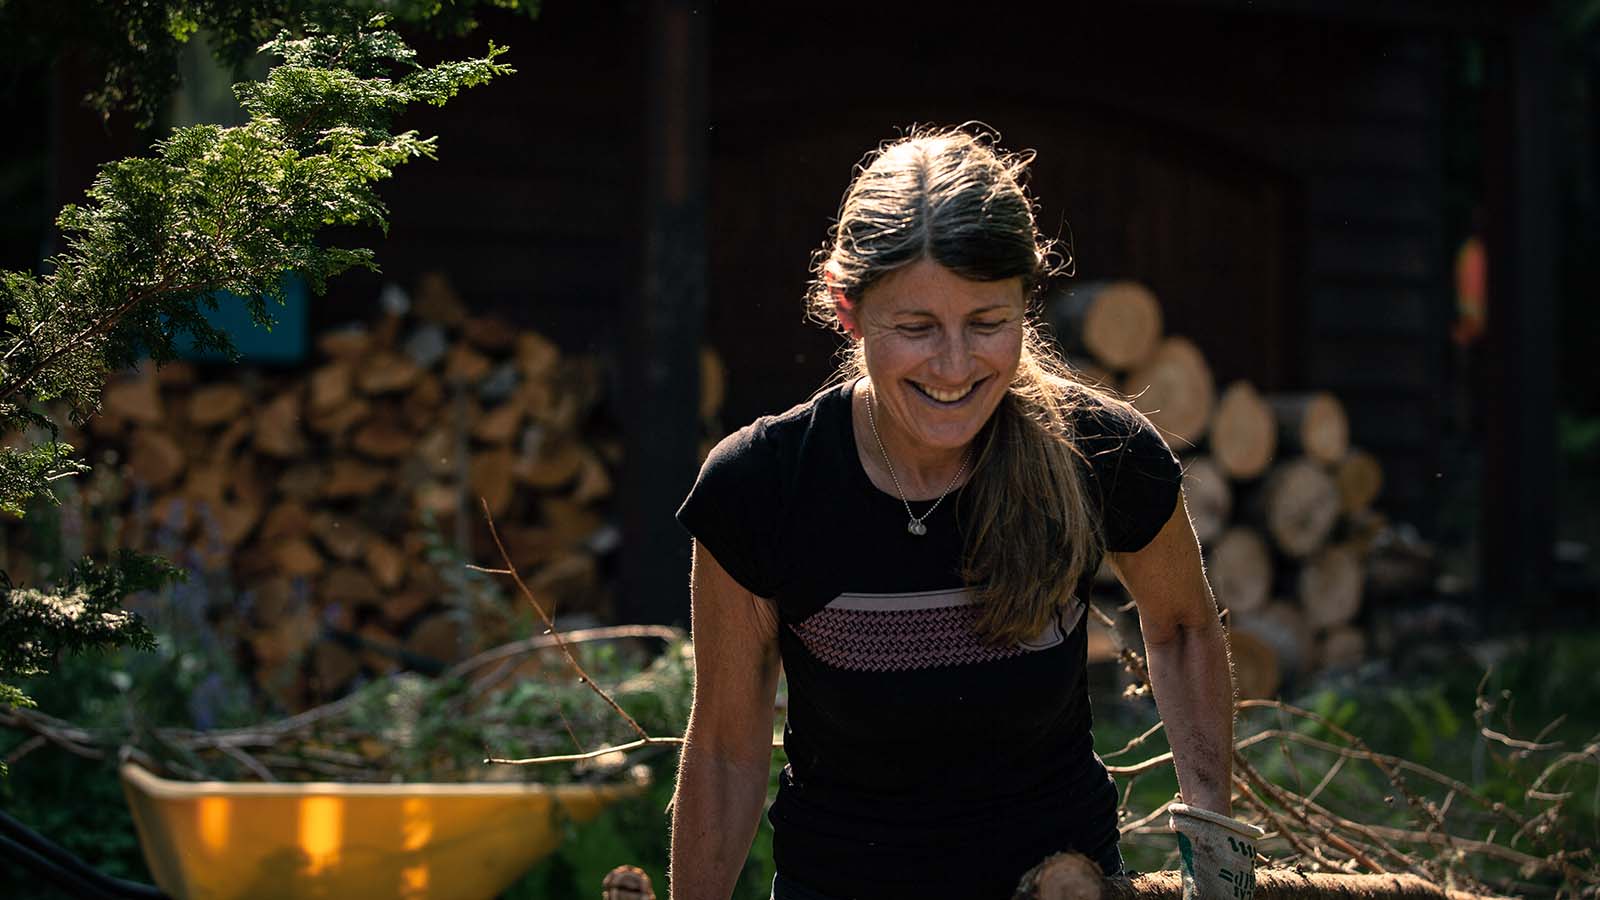 A woman smiling while working outdoors, with a pile of firewood in the background.